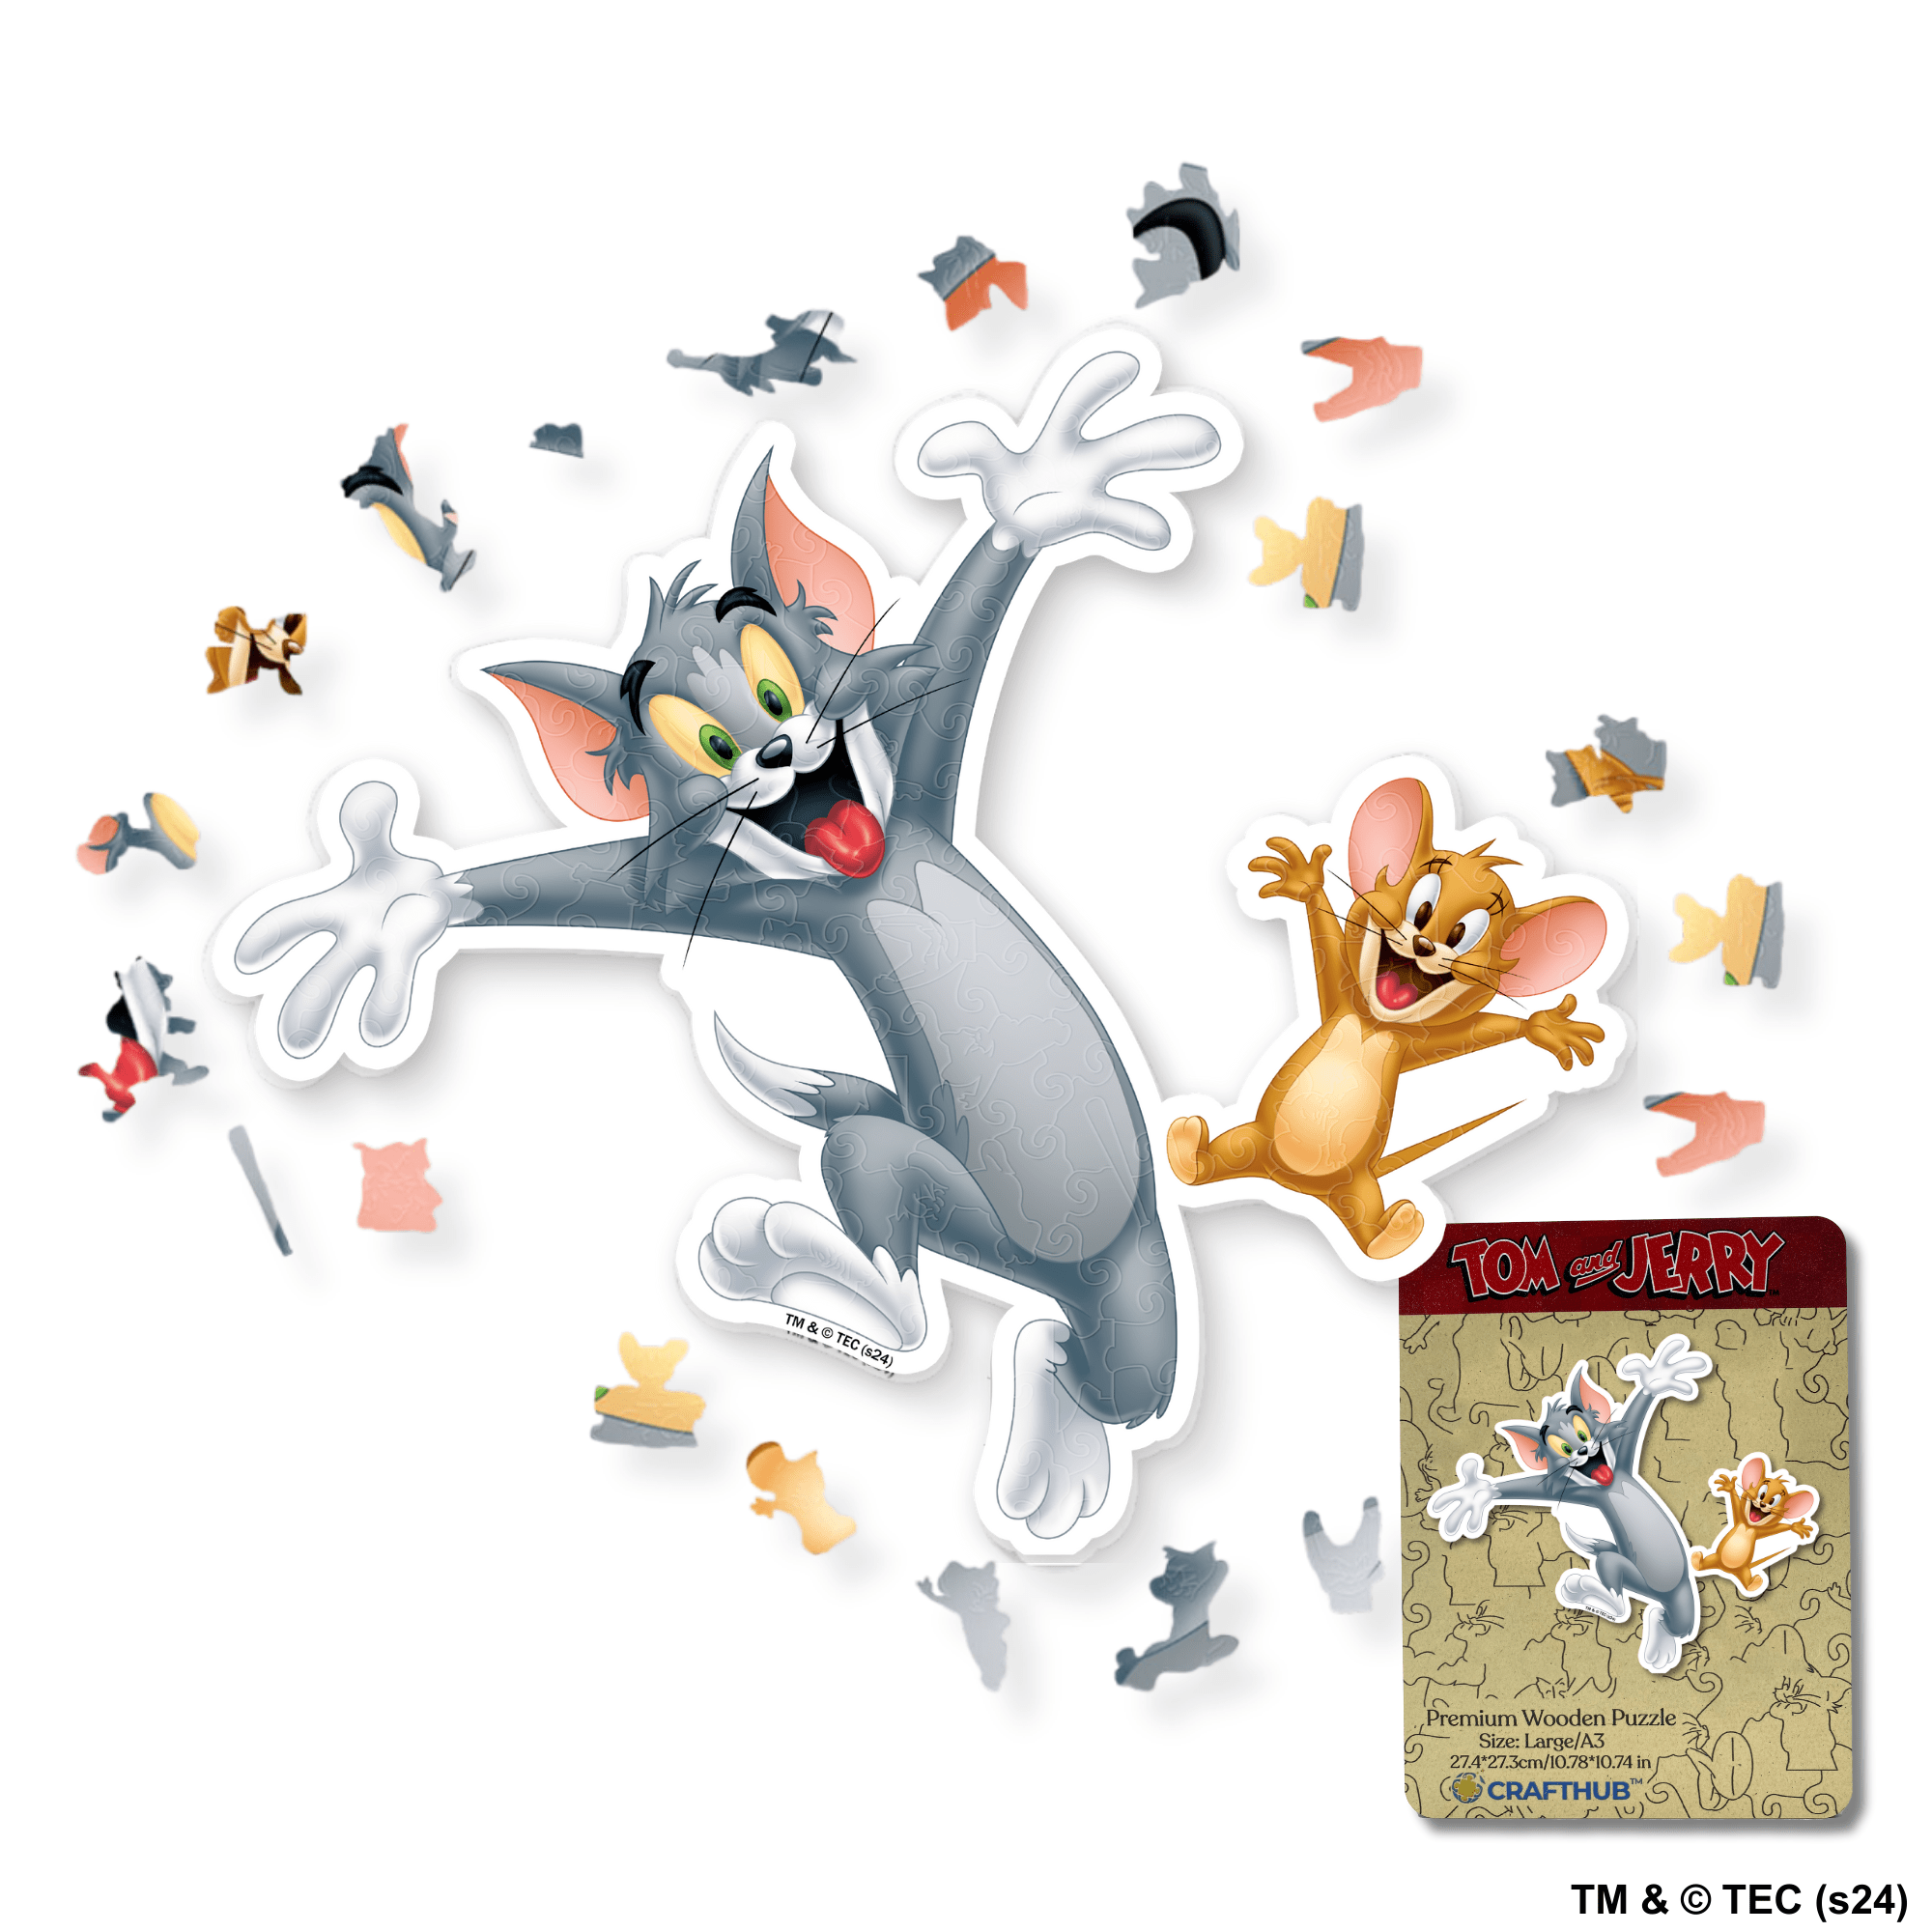 Animal Jigsaw Puzzle > Wooden Jigsaw Puzzle > Jigsaw Puzzle A3 Cheerful Tom & Jerry Wooden Jigsaw Puzzle